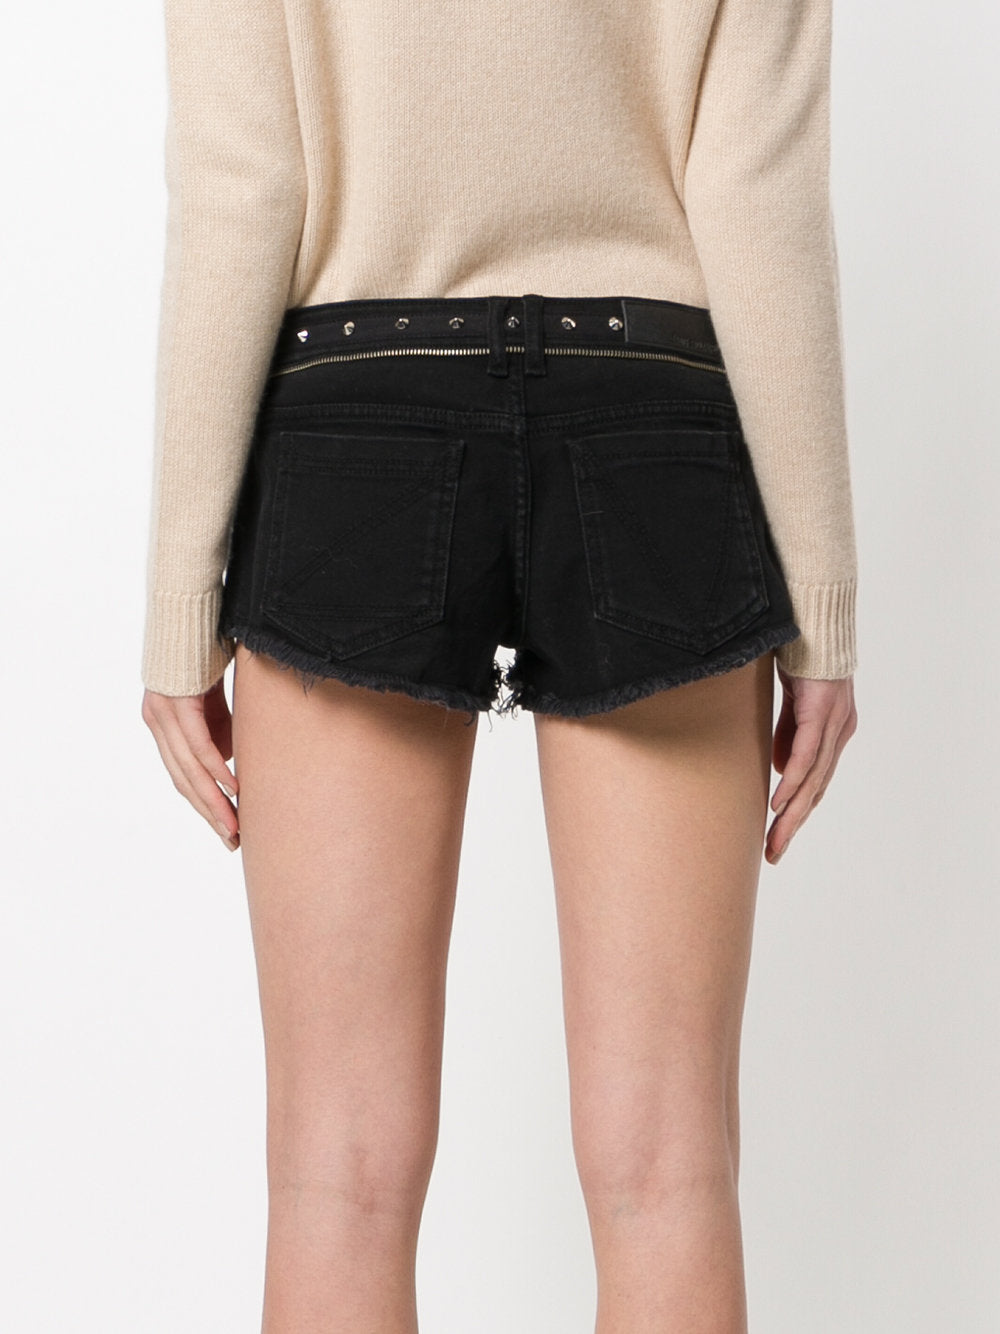 Paly Spikes Shorts